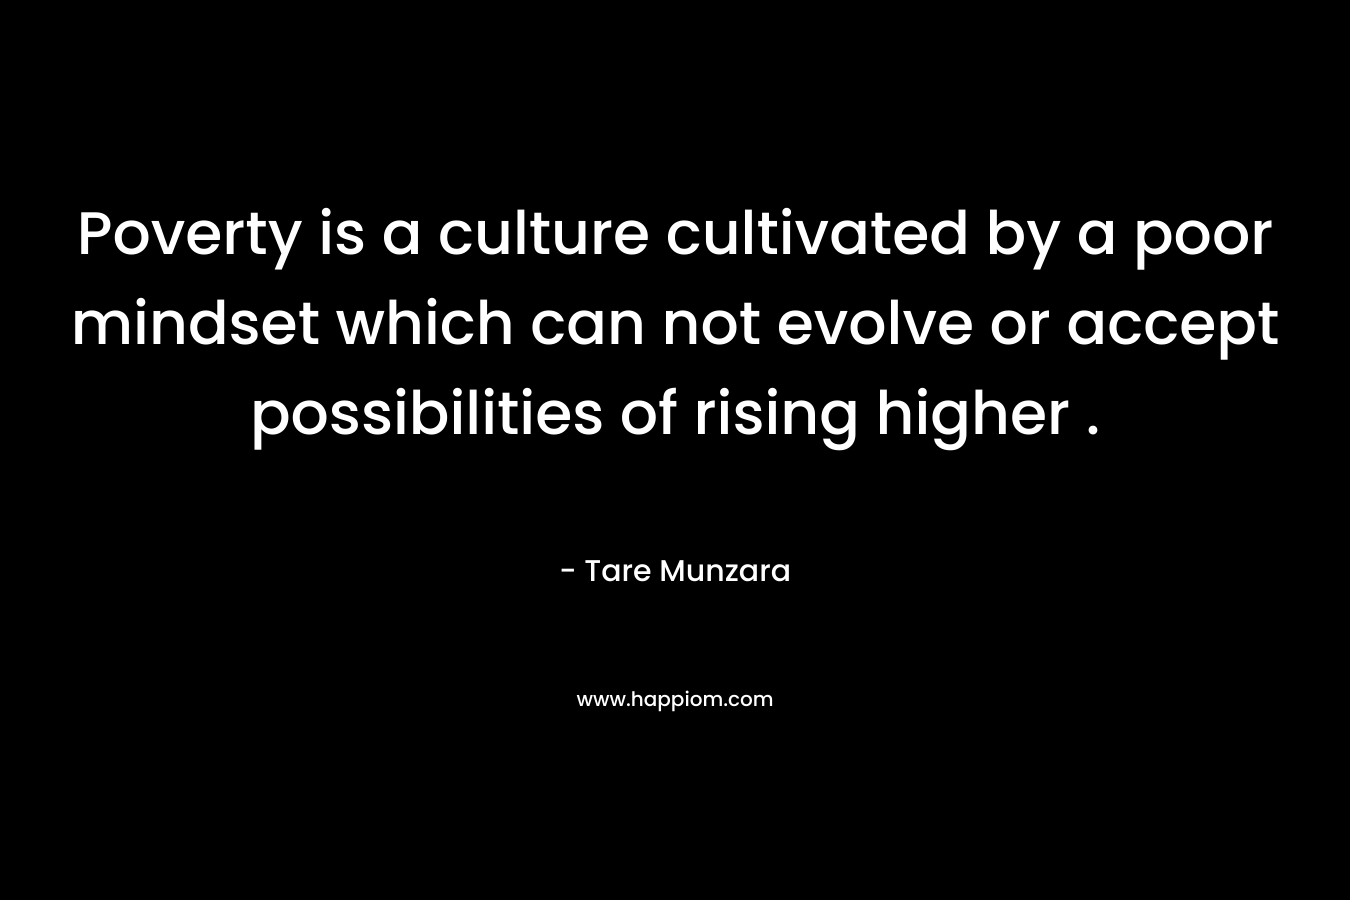 Poverty is a culture cultivated by a poor mindset which can not evolve or accept possibilities of rising higher . – Tare Munzara